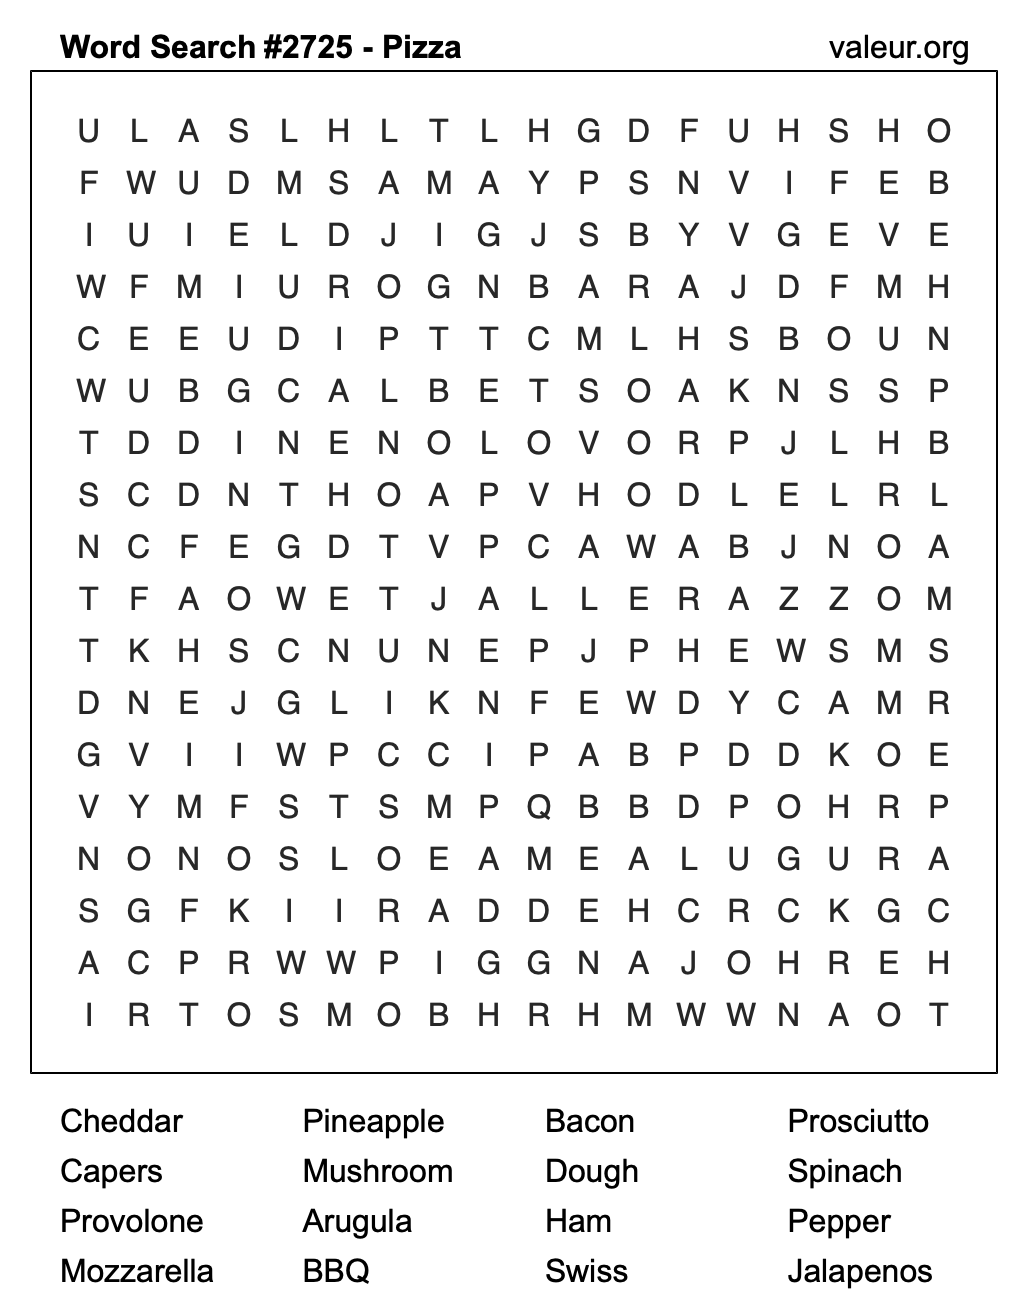 Pizza Word Search Puzzle #2725